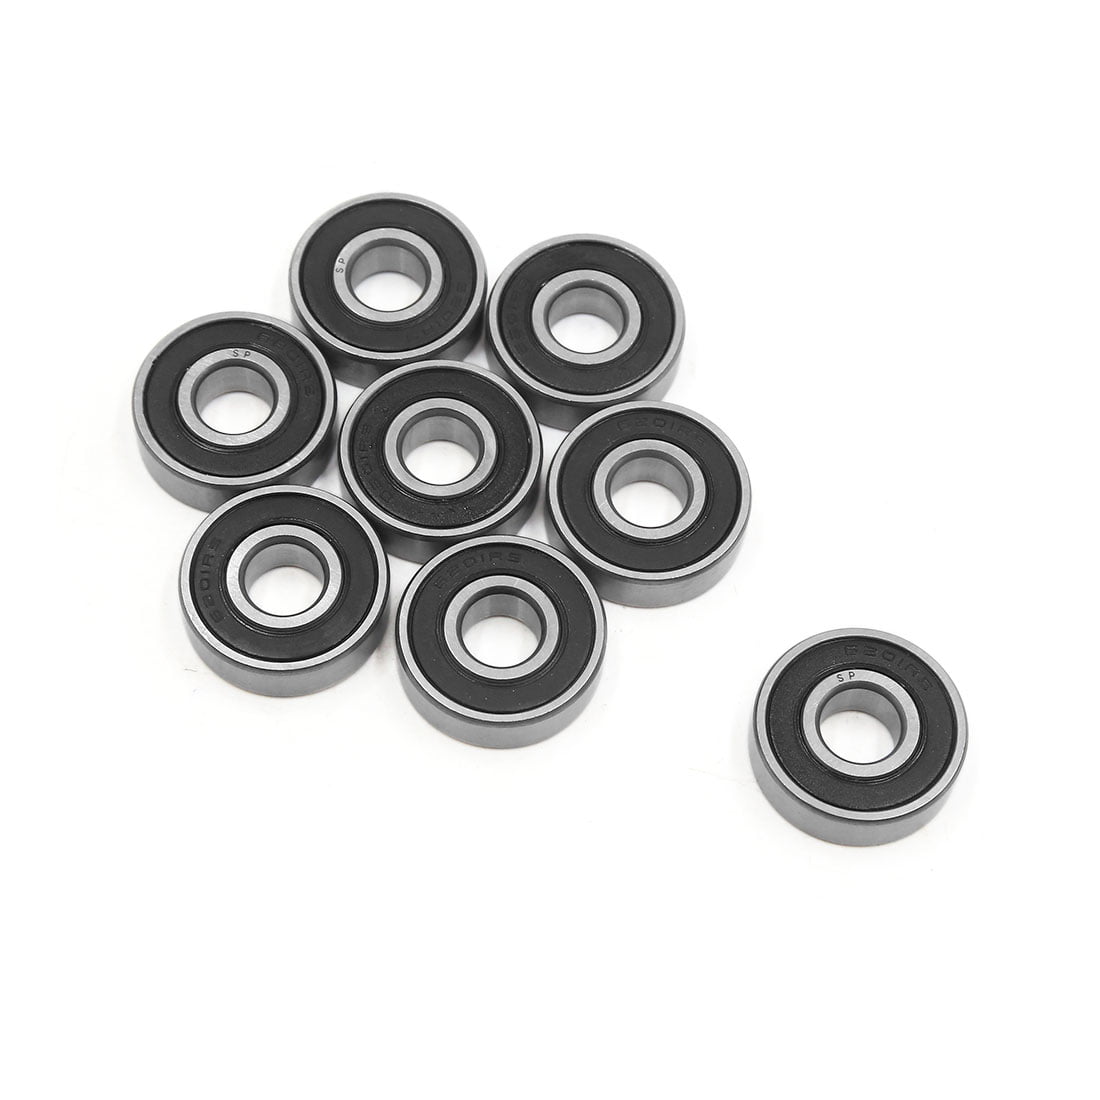 6201-2RS 12 x 32 x 10 mm 